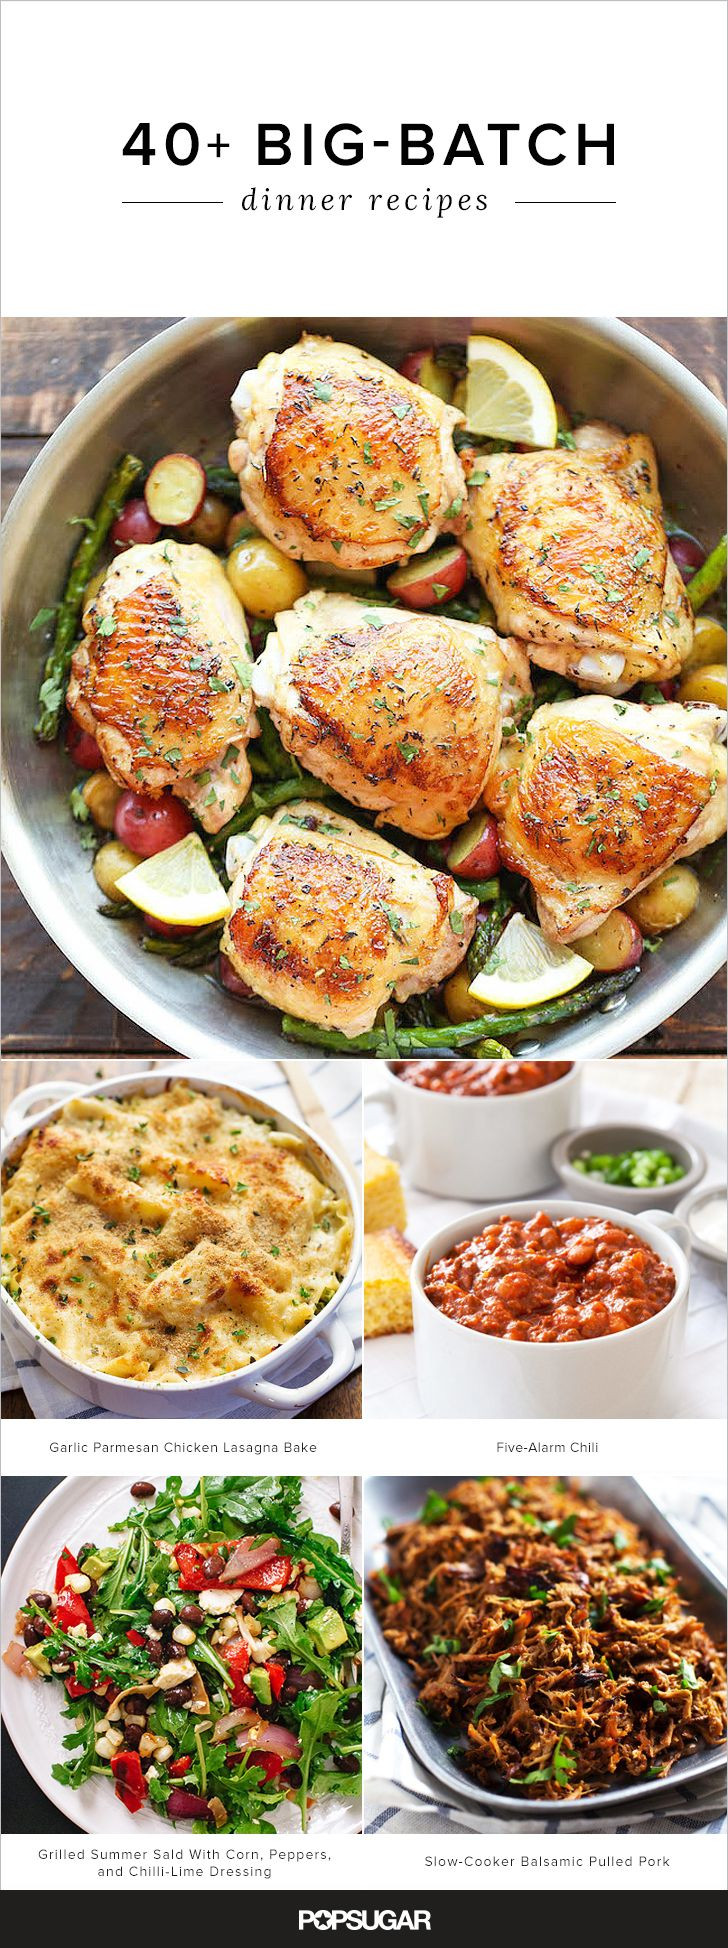 Dinner Ideas For A Crowd
 40 Recipes That Make Feeding a Crowd a Breeze